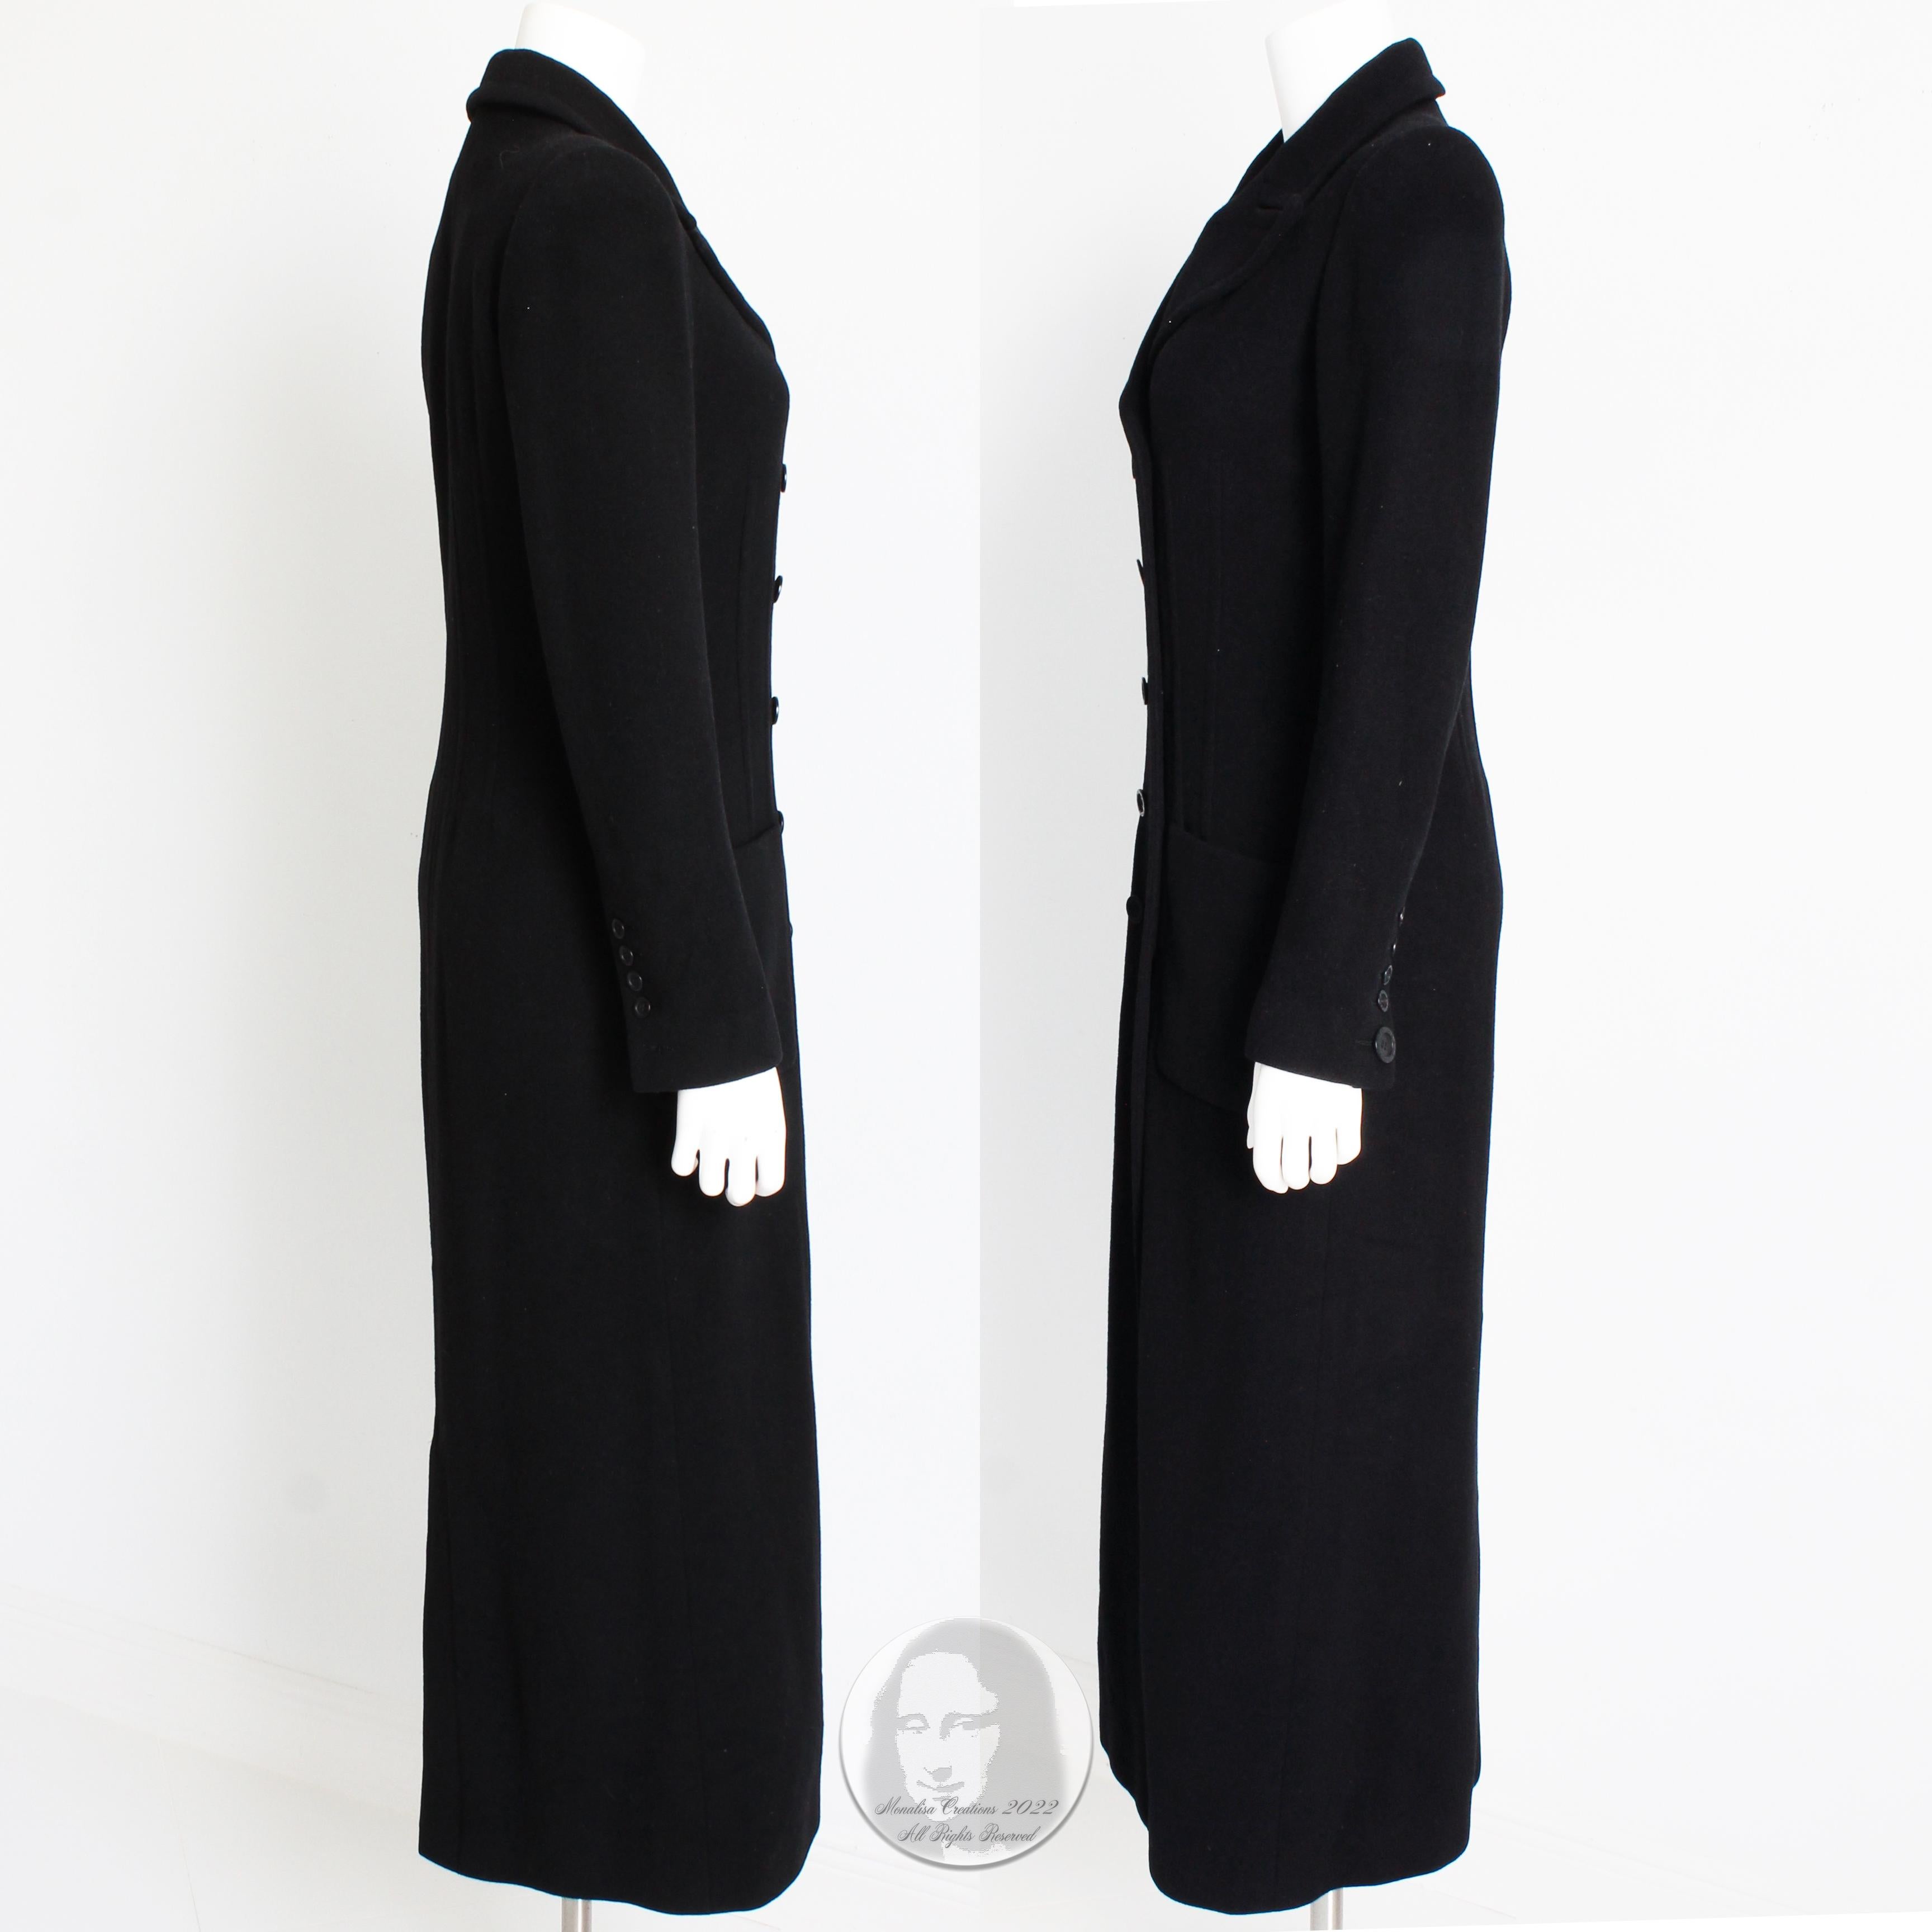 Sonia Rykiel Cashmere Coat Black Double Breasted Long Trench Style Sz 38 Vintage 1